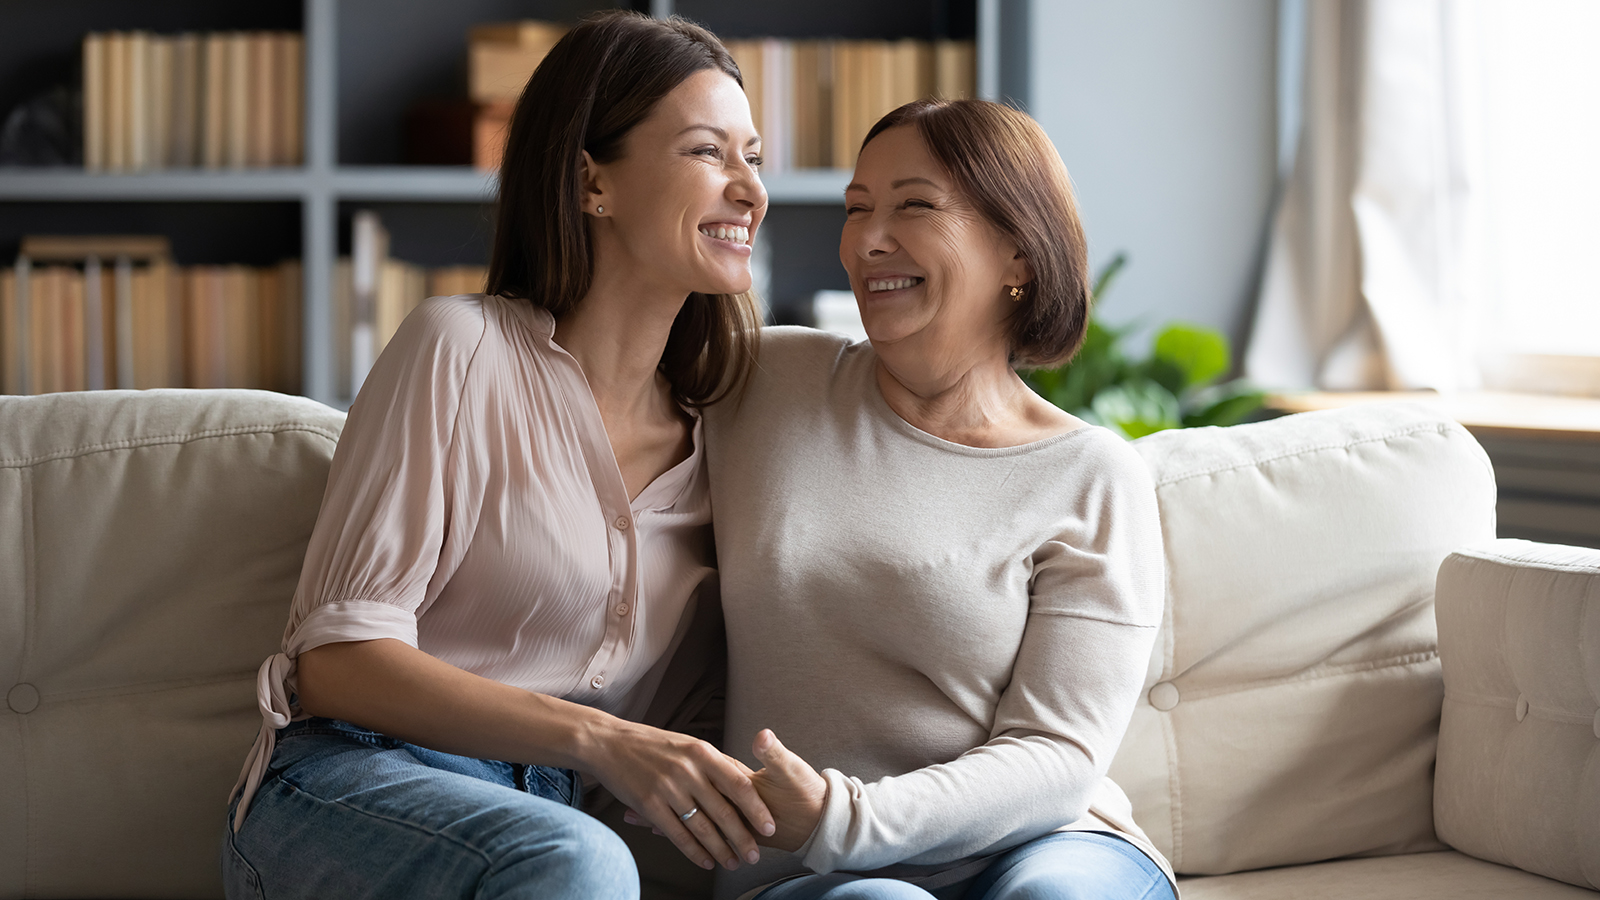 Overjoyed young woman with mature mother chatting, laughing at joke, enjoying pleasant conversation, middle aged mum and grownup daughter hugging, having fun, sitting on cozy couch at home